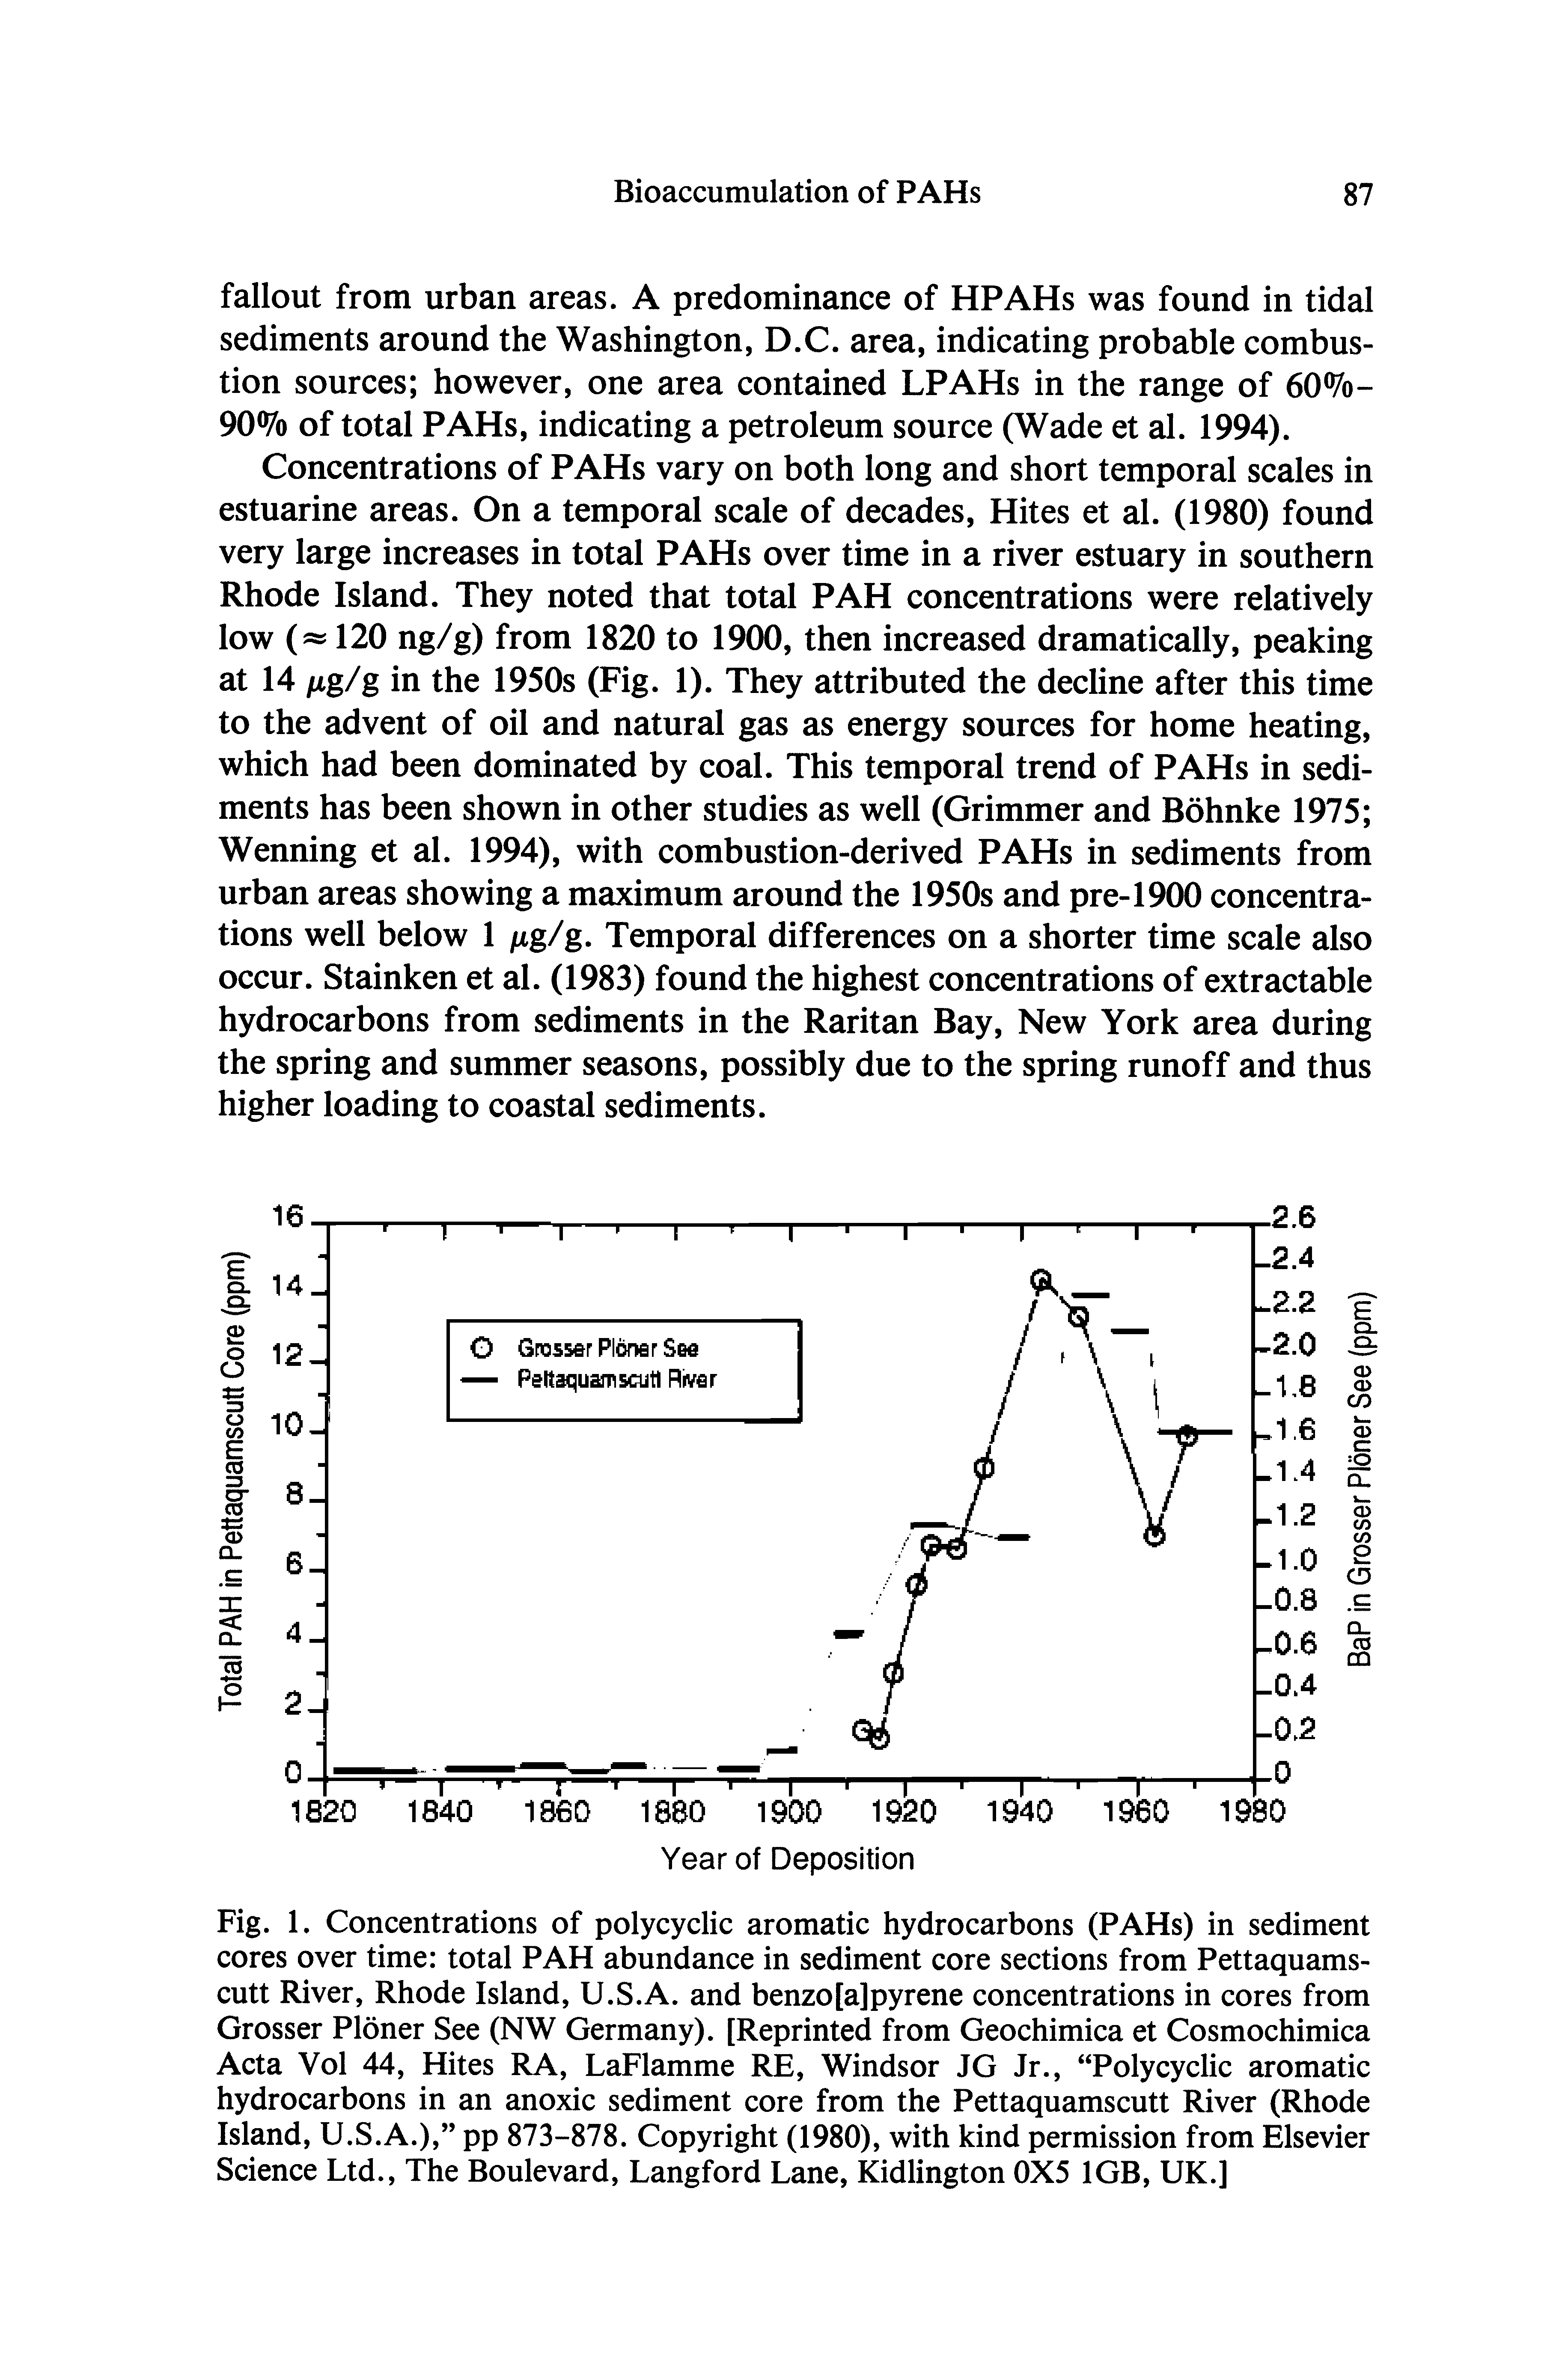 Fig. 1. Concentrations of polycyclic aromatic hydrocarbons (PAHs) in sediment cores over time total PAH abundance in sediment core sections from Pettaquams-cutt River, Rhode Island, U.S.A. and benzo[a]pyrene concentrations in cores from Grosser Ploner See (NW Germany). [Reprinted from Geochimica et Cosmochimica Acta Vol 44, Hites RA, LaFlamme RE, Windsor JG Jr., Polycyclic aromatic hydrocarbons in an anoxic sediment core from the Pettaquamscutt River (Rhode Island, U.S.A.), pp 873-878. Copyright (1980), with kind permission from Elsevier Science Ltd., The Boulevard, Langford Lane, Kidlington 0X5 1GB, UK.]...